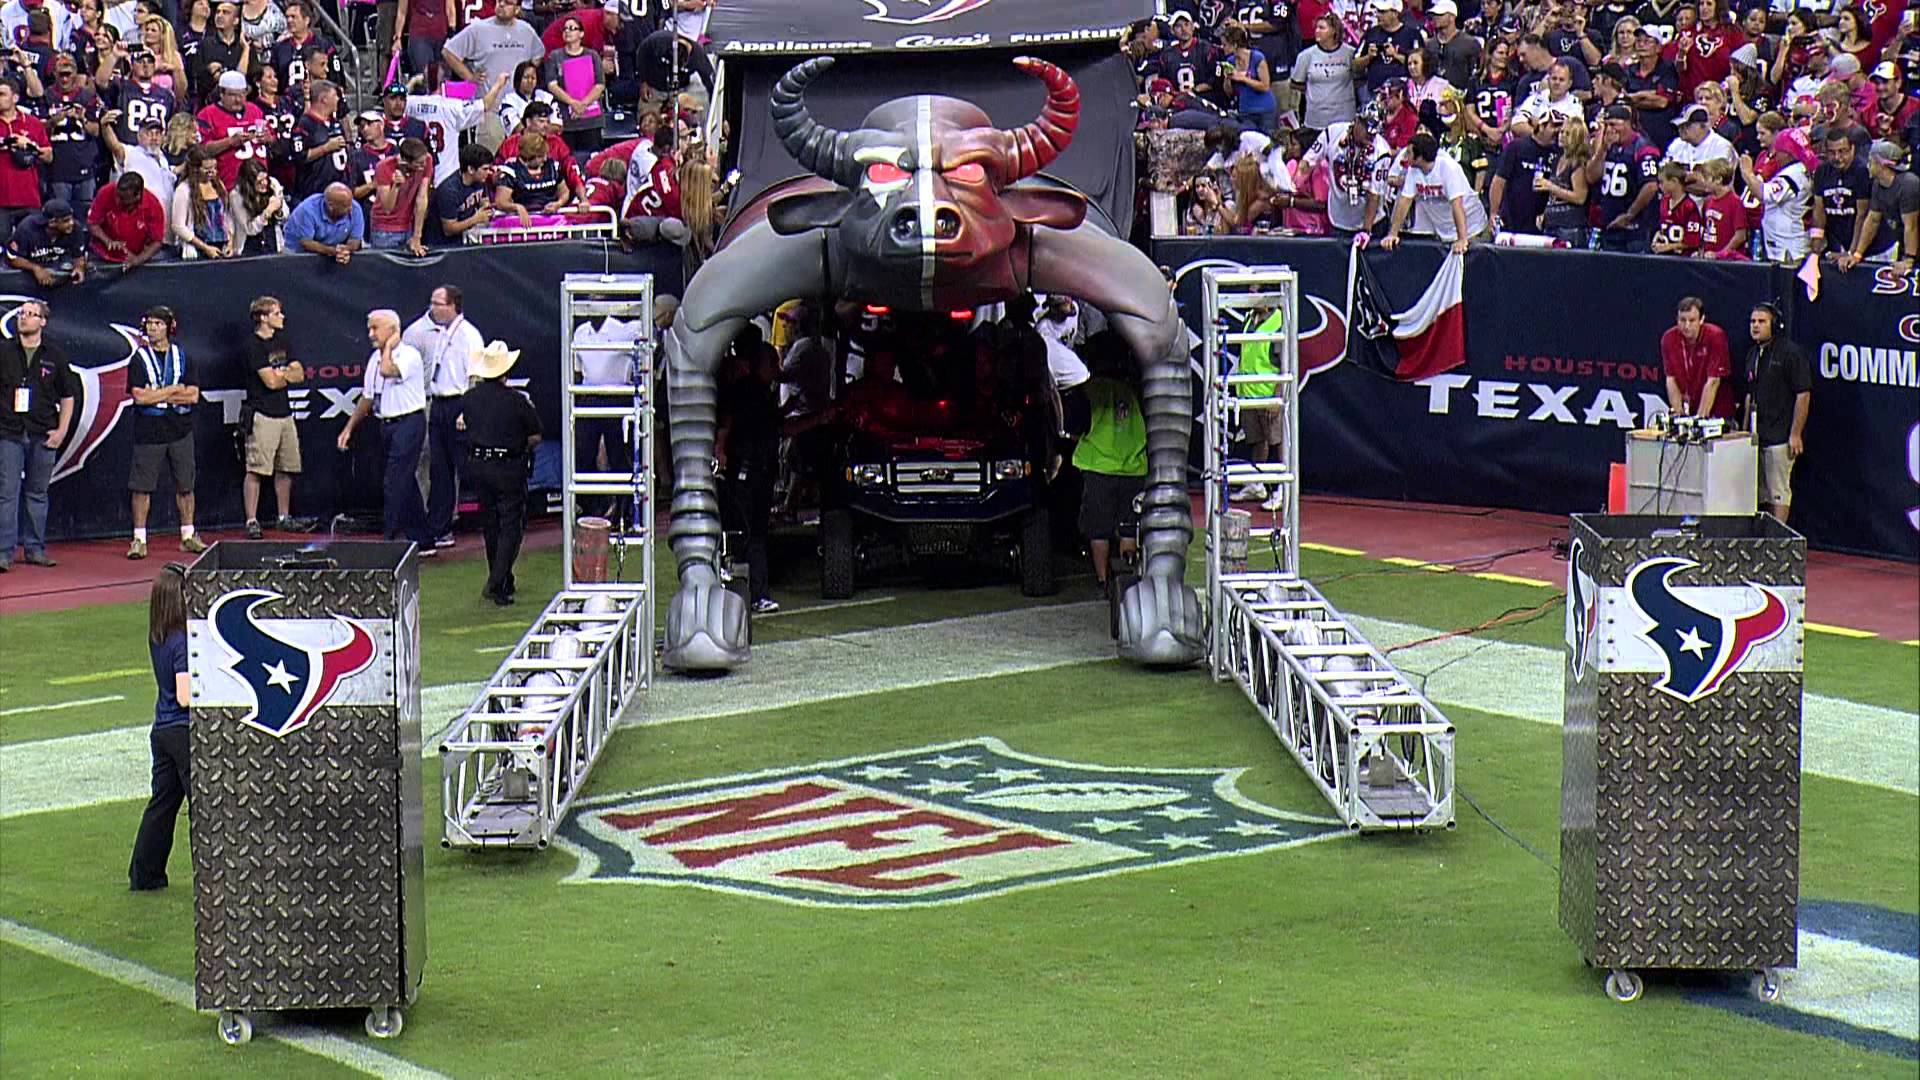 TEXANS BULLS ON PARADE COMING OUT OF THE TUNNEL LIVE SATELLITE